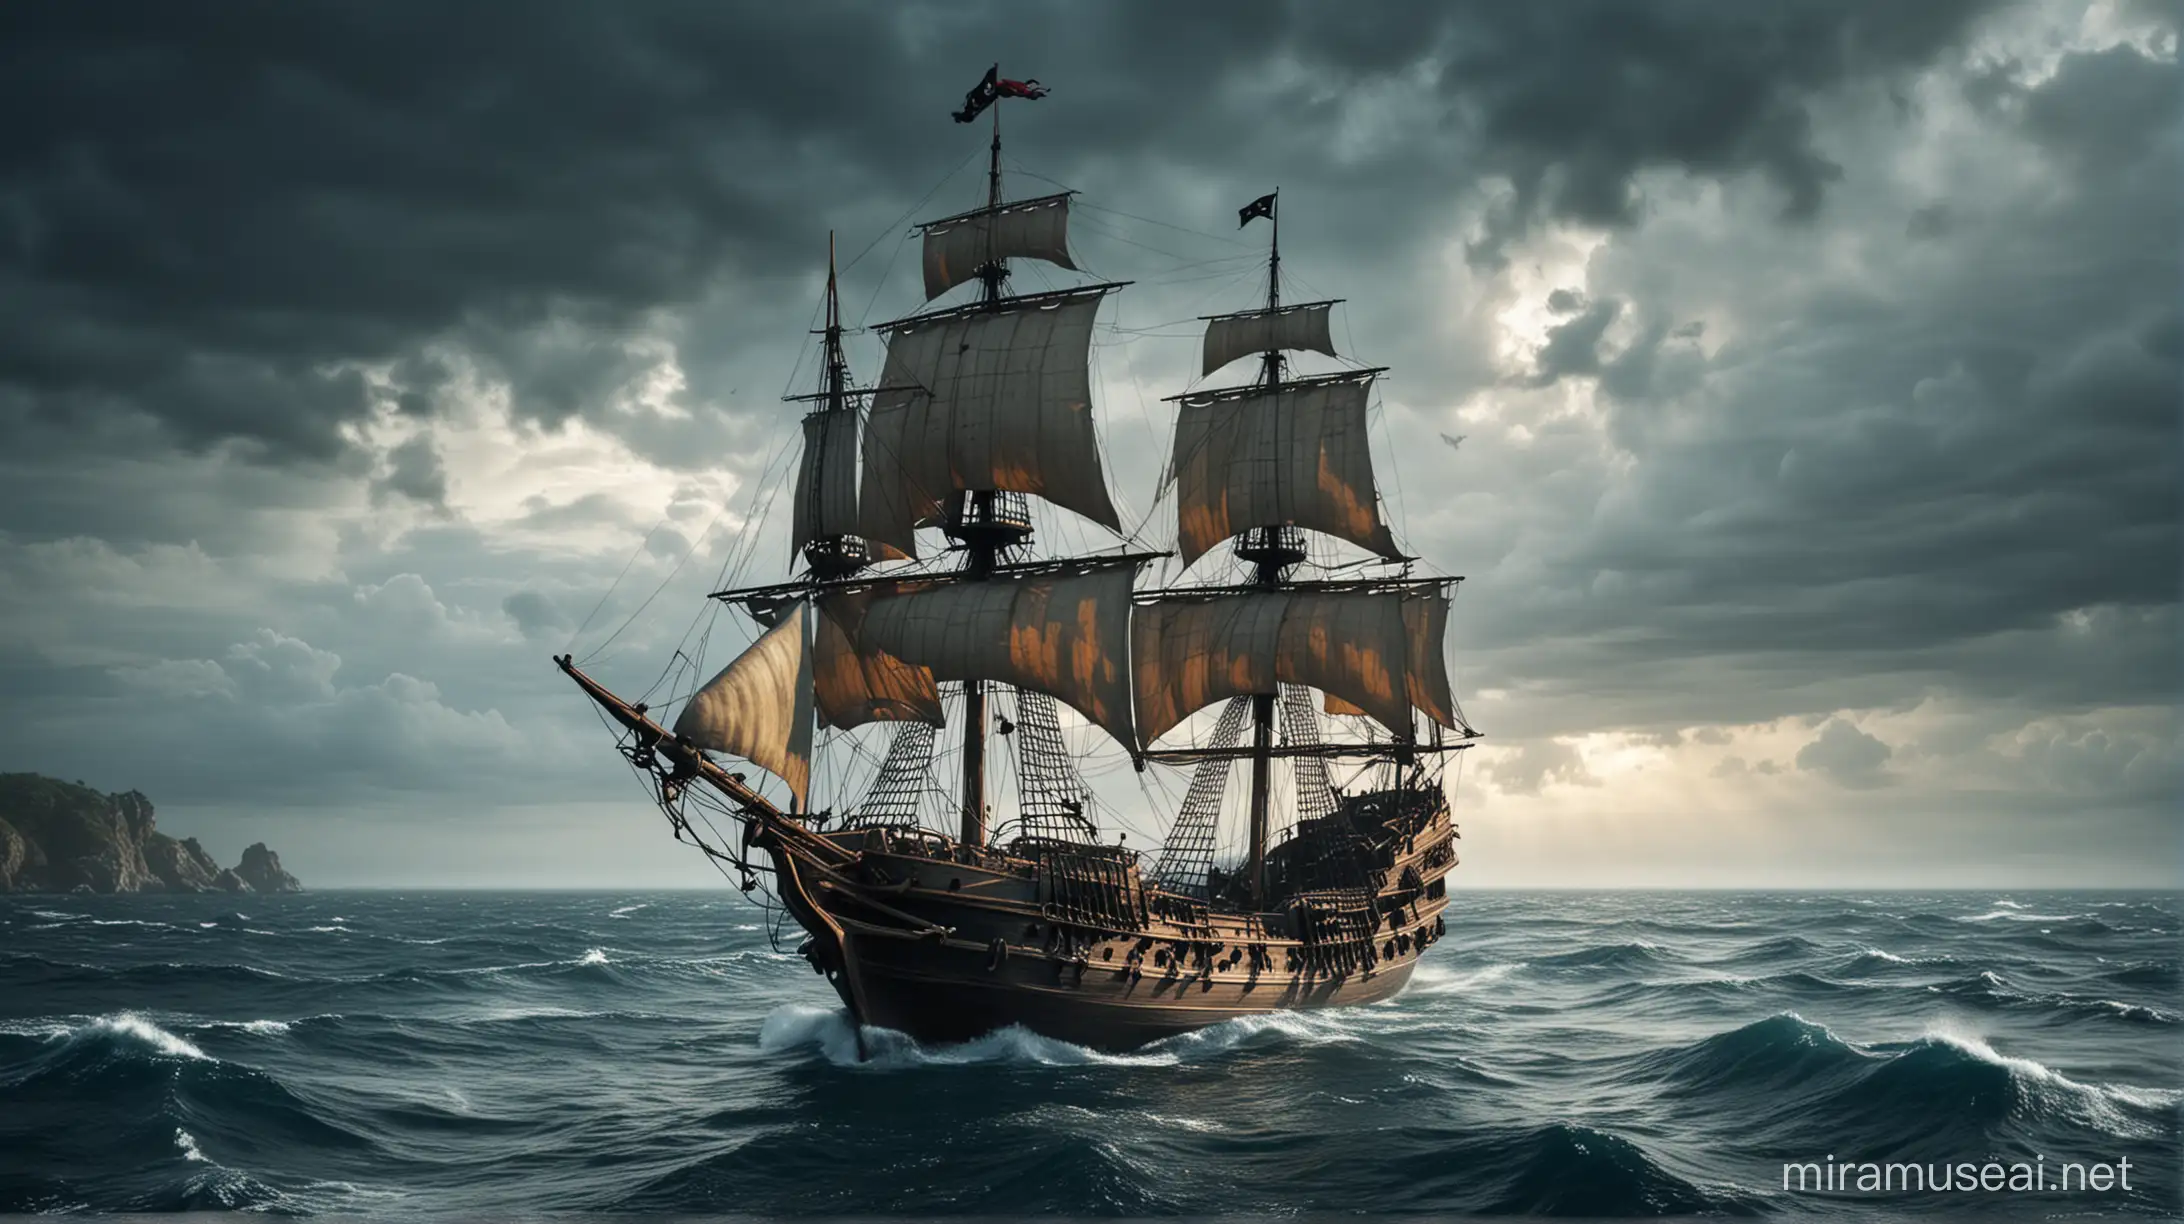 Pirates Ship Sailing on the Vast Ocean Waves